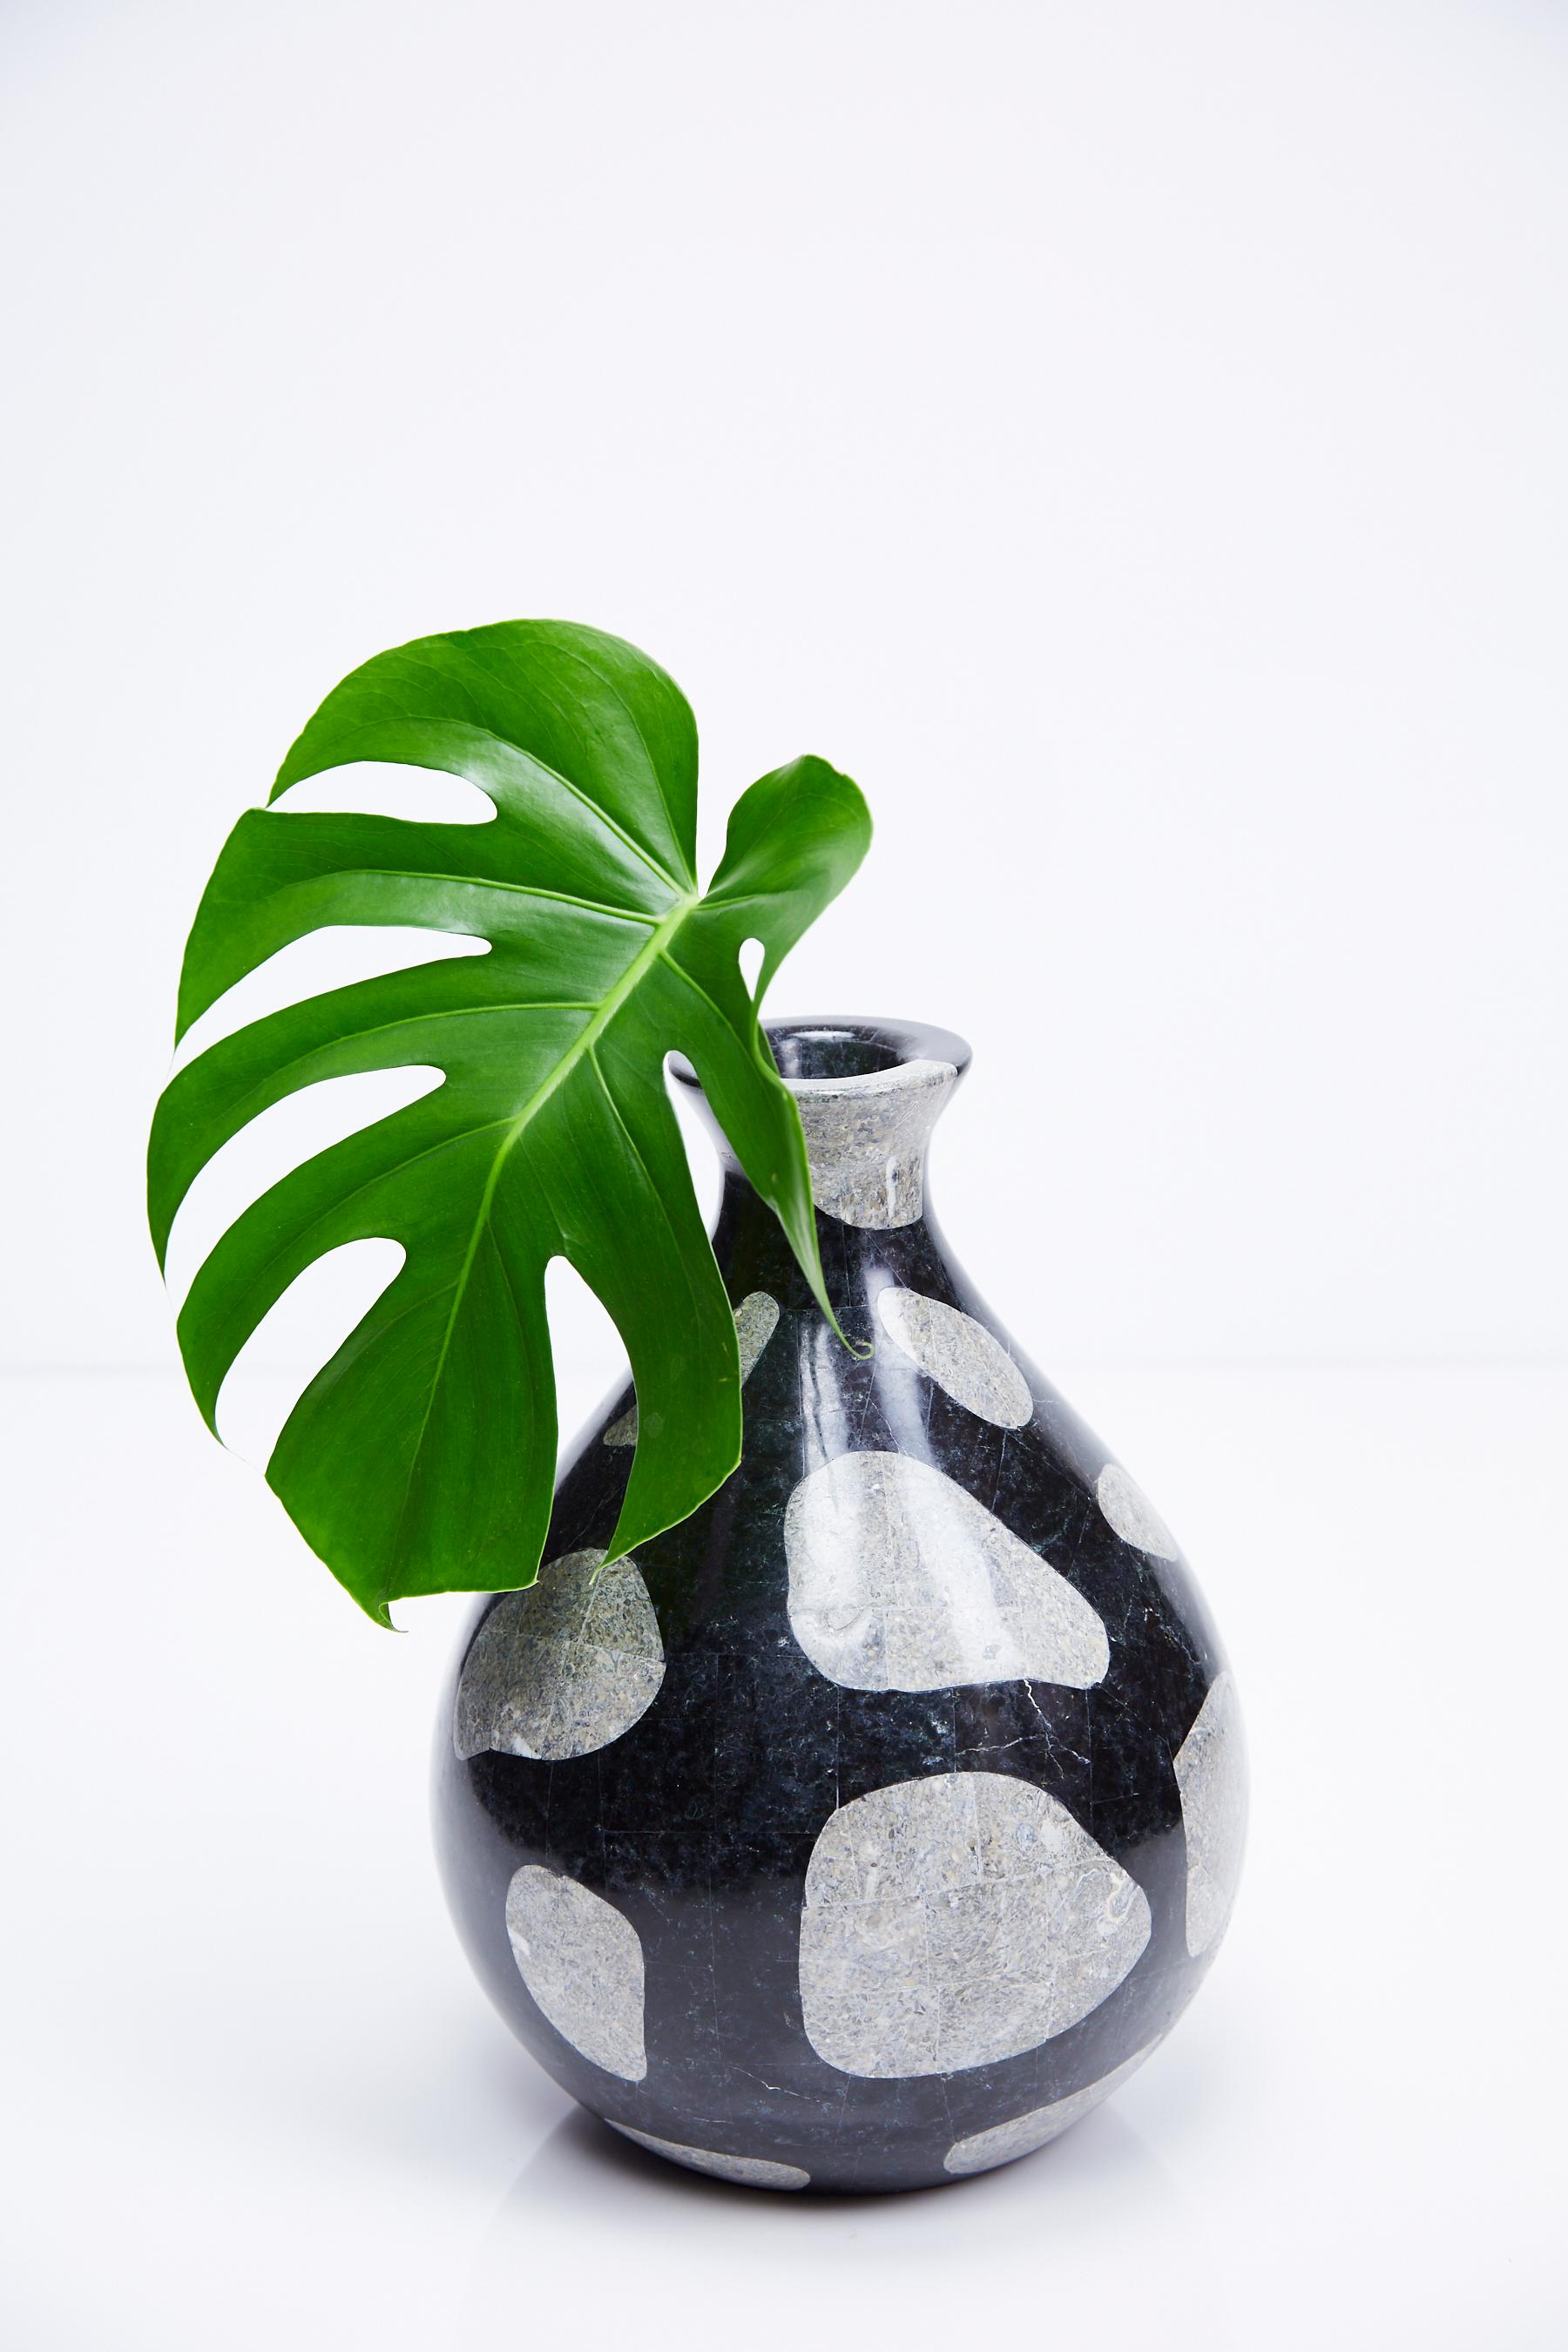 Teardrop shaped vase in tessellated black and cantor stone with spotted 'giraffe' decoration over fiberglass body.

All furnishings are made from 100% natural Fossil Stone or Seashell inlay, carefully hand cut and crafted piece-by-piece and